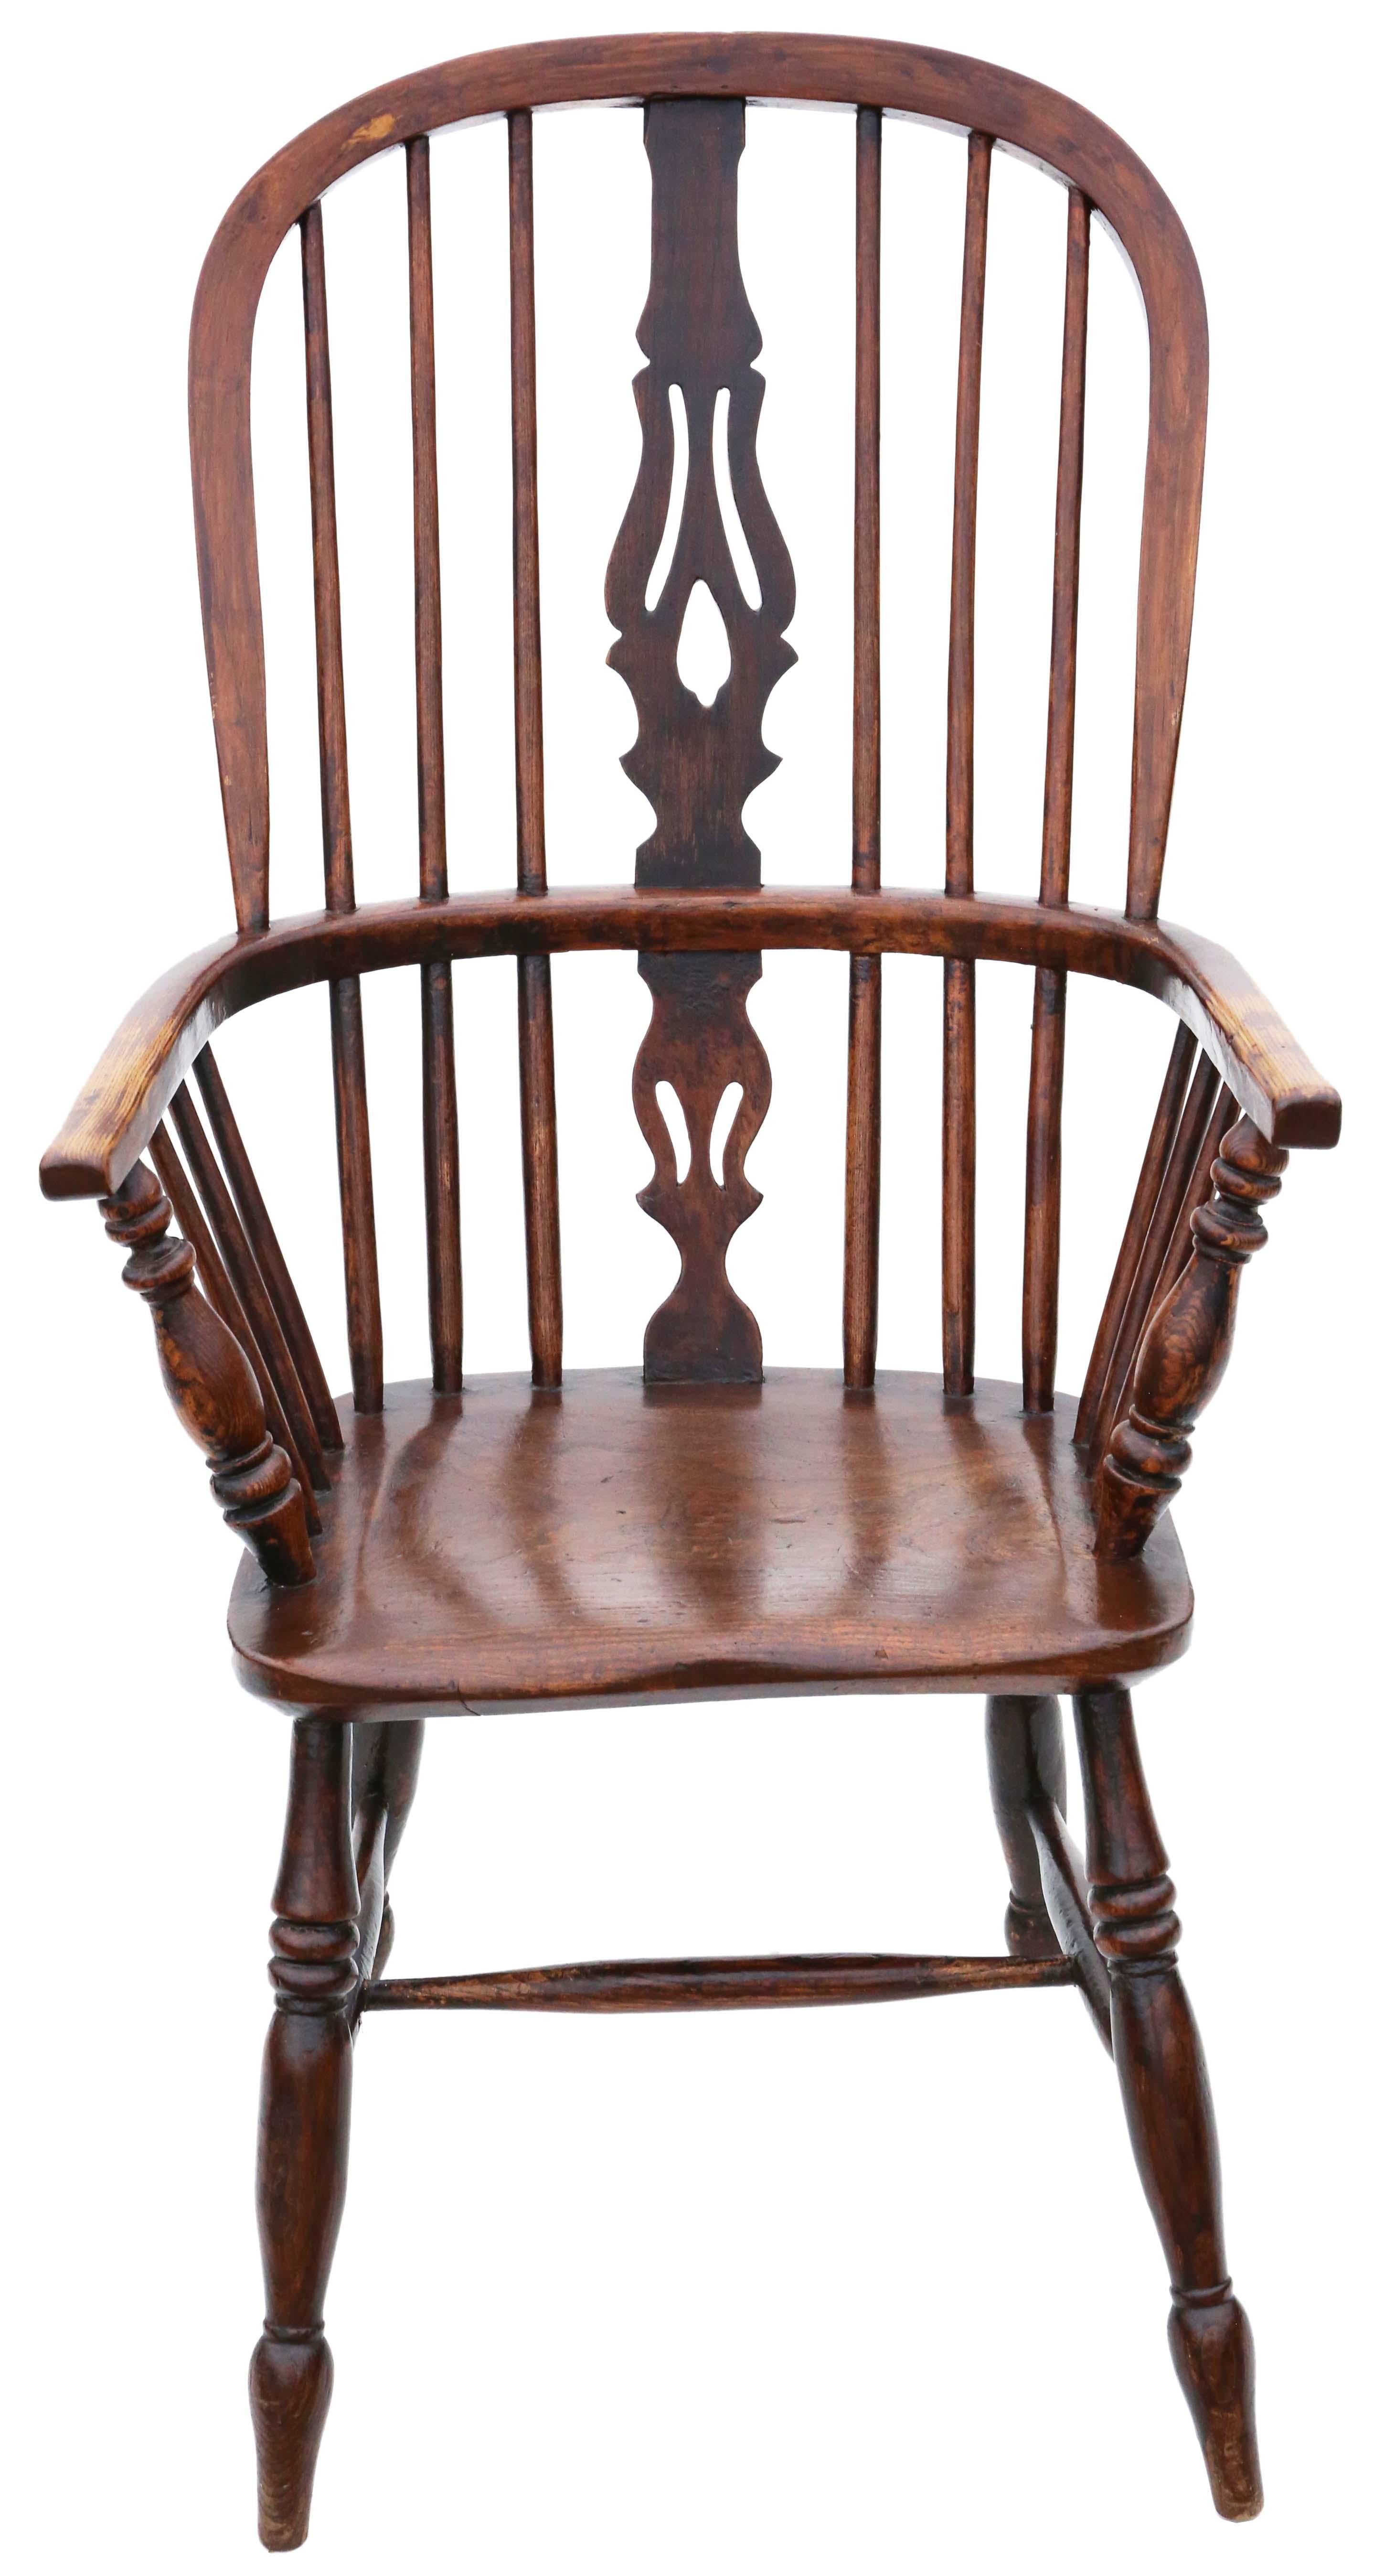 Antique quality 19th Century ash and elm Windsor chair dining armchair.

Solid and strong, with no loose joints and no woodworm. Full of age, character and charm.

Would look great in the right location!

Overall maximum dimensions: 60cmW x 70cmD x